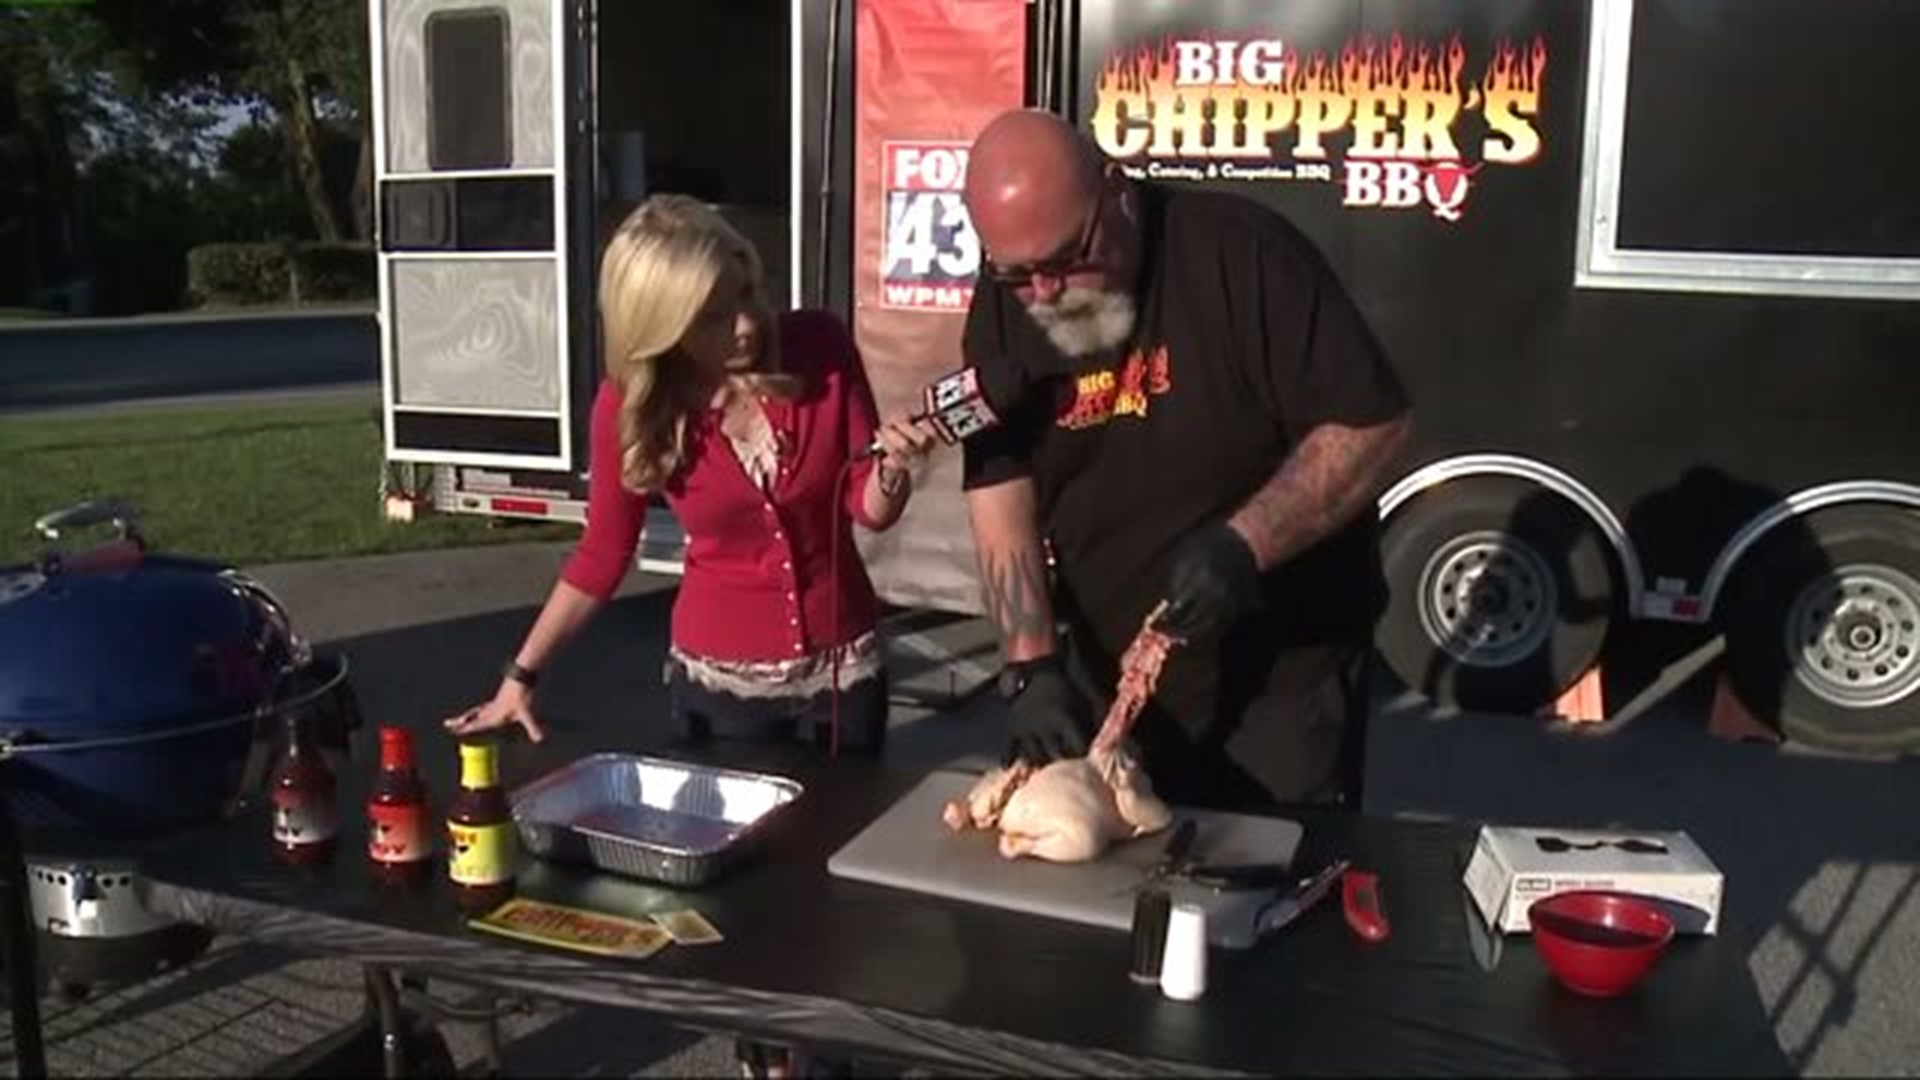 Bring some "Spatchcocked Chicken" to your next BBQ